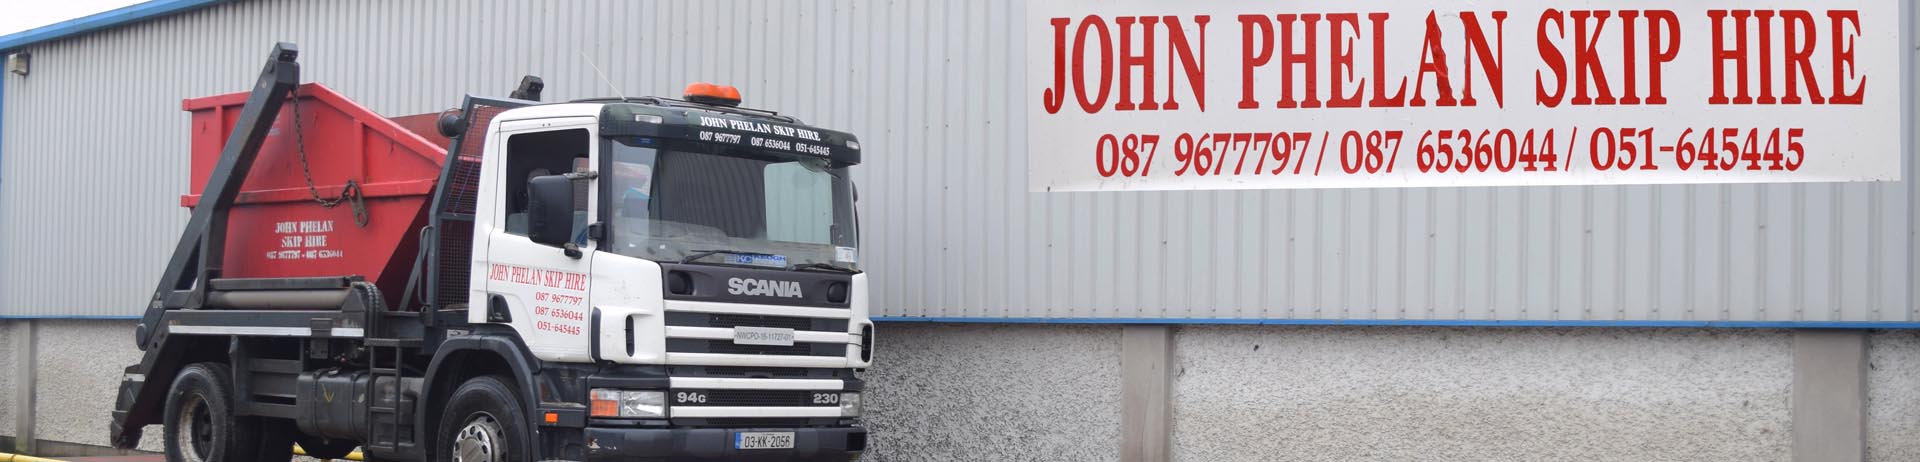 skip hire in tipperary